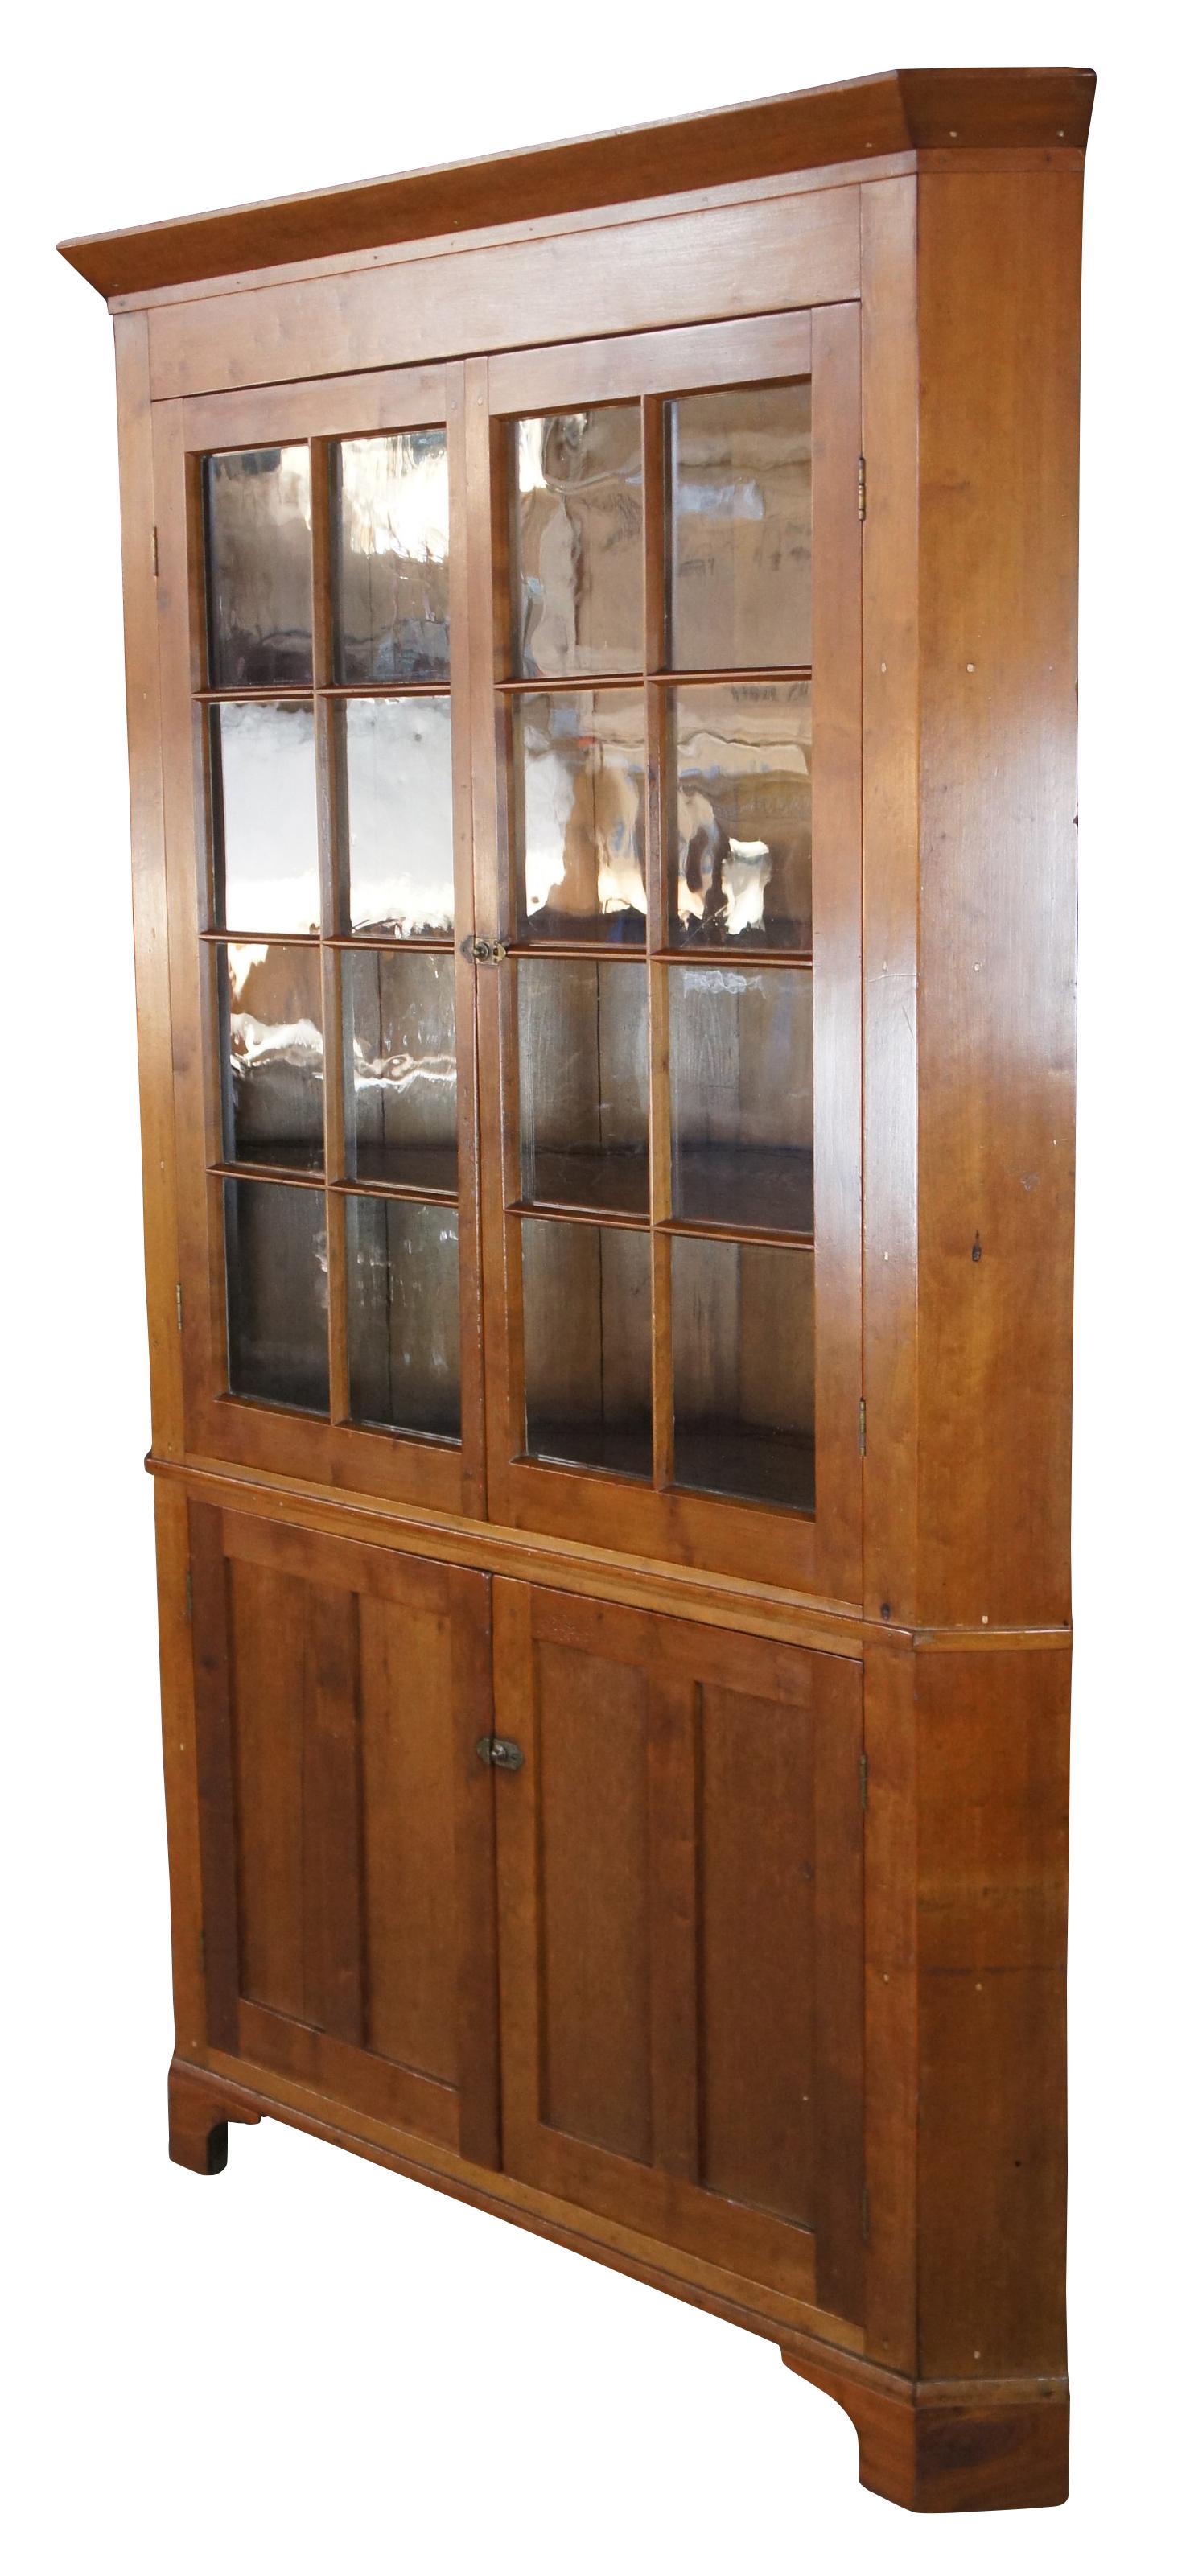 Antique Early American Corner Cabinet. Made from cherry with original glass and oak shelving. Features a 16 pane display portion and four upper shelves with plate grooves. Lower cupboard has one shelf with plate grooves and another without. The